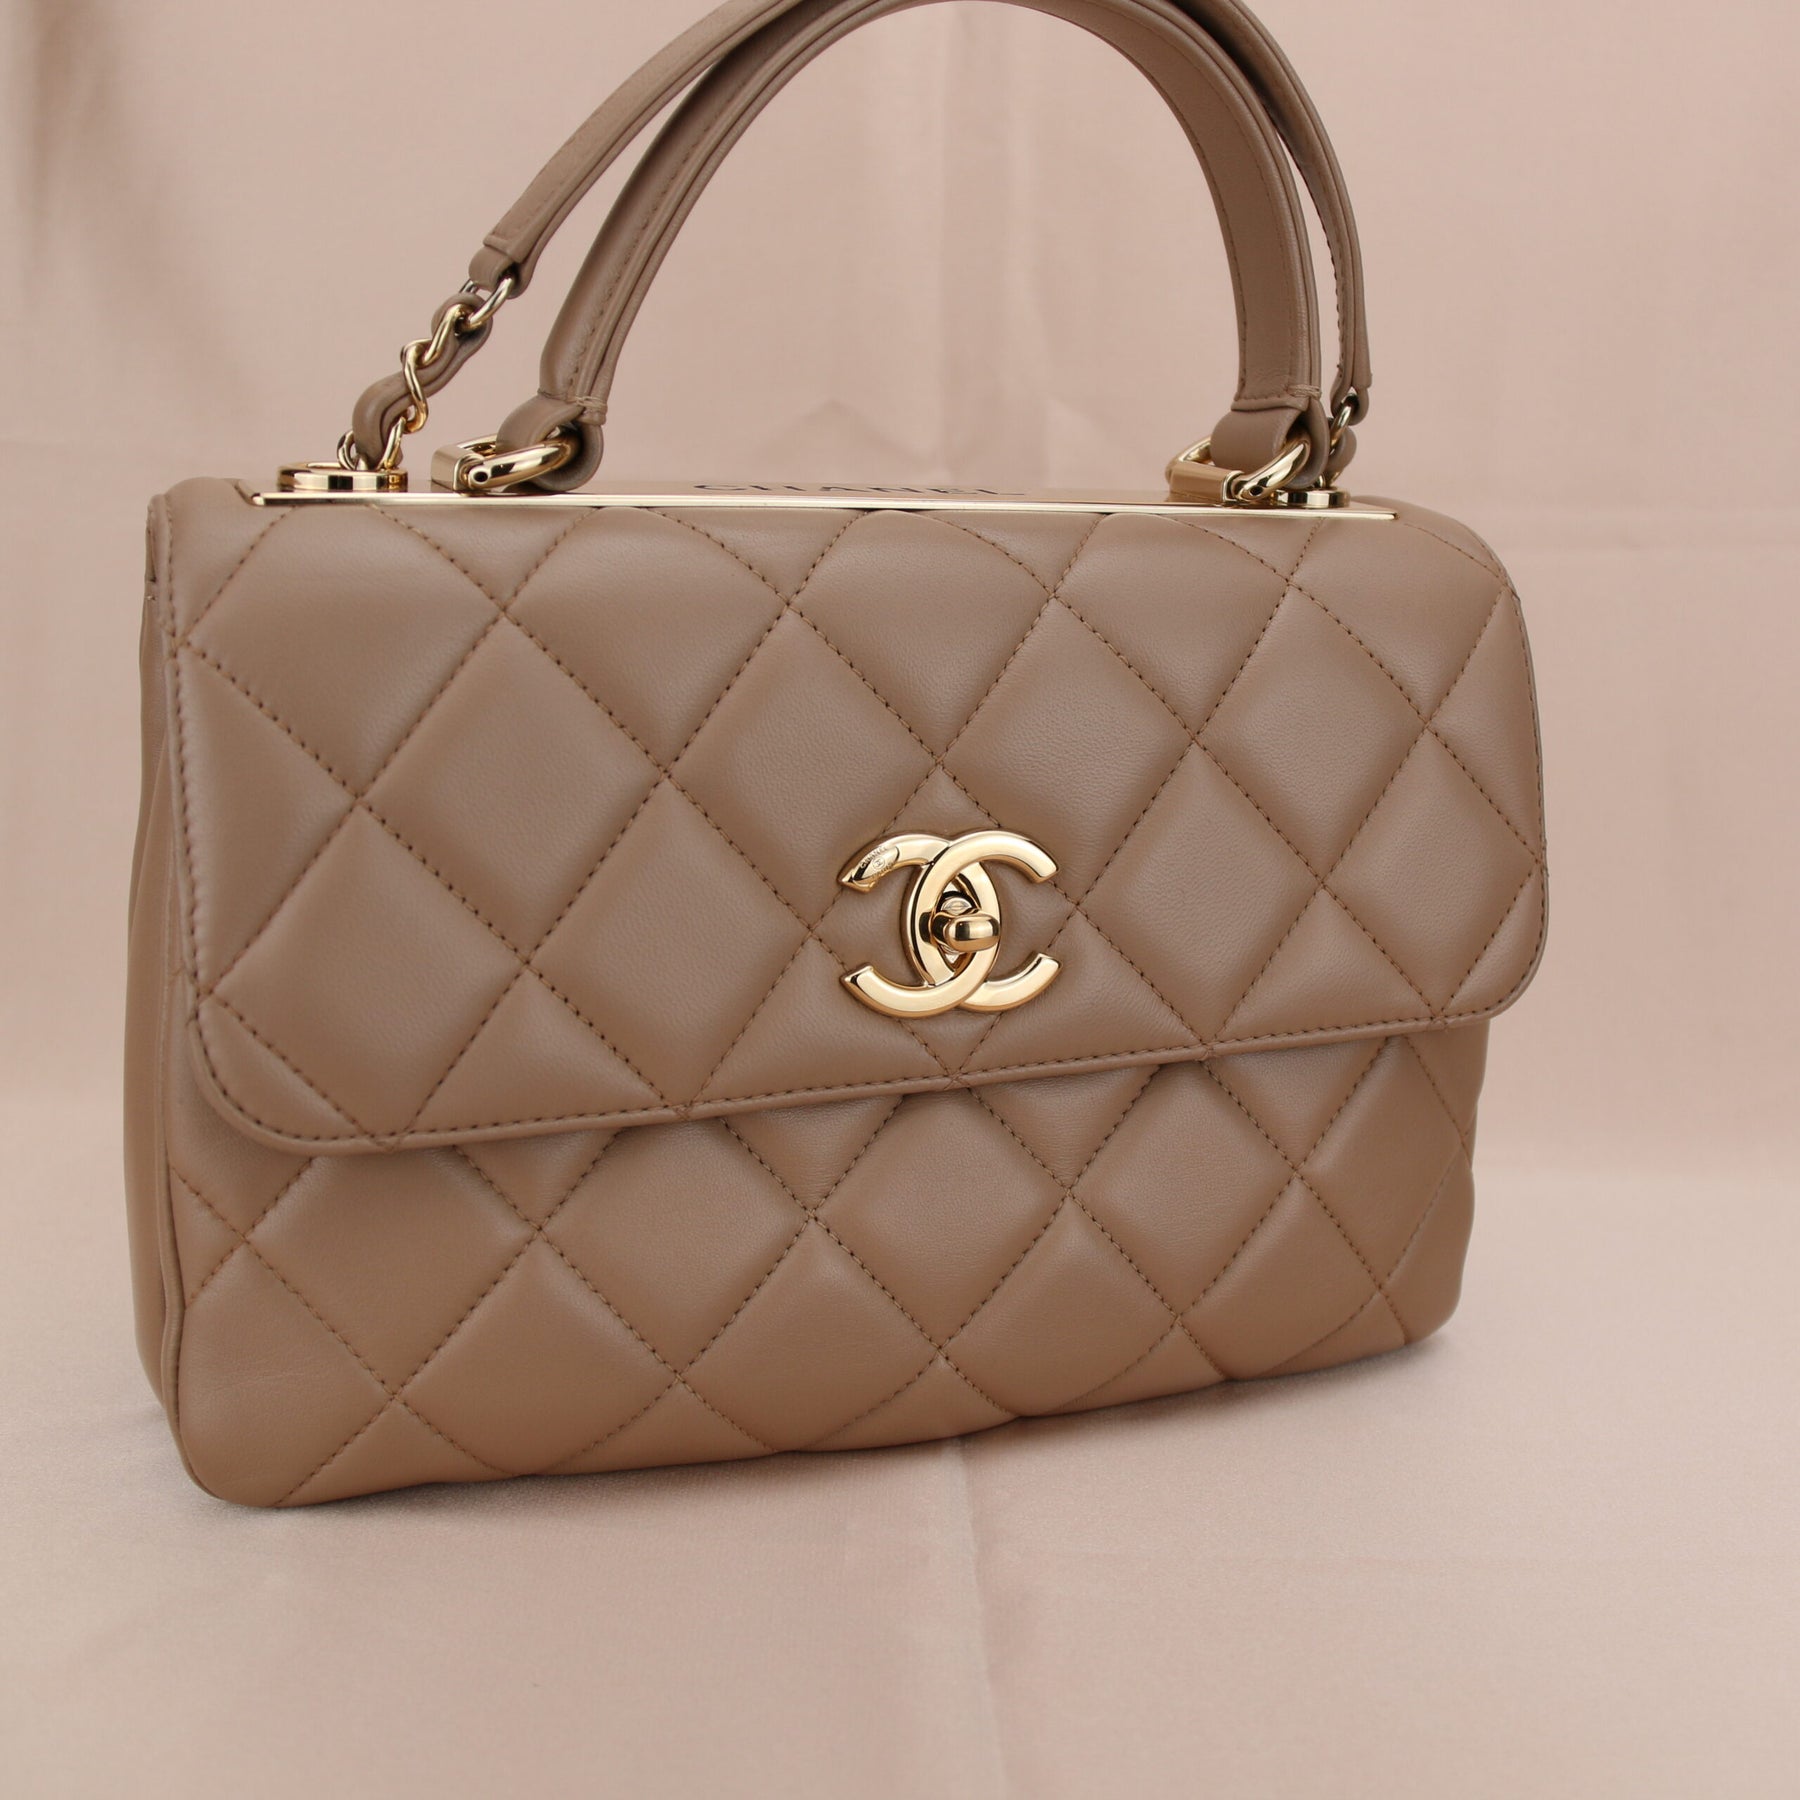 Trendy cc top handle leather handbag Chanel Beige in Leather